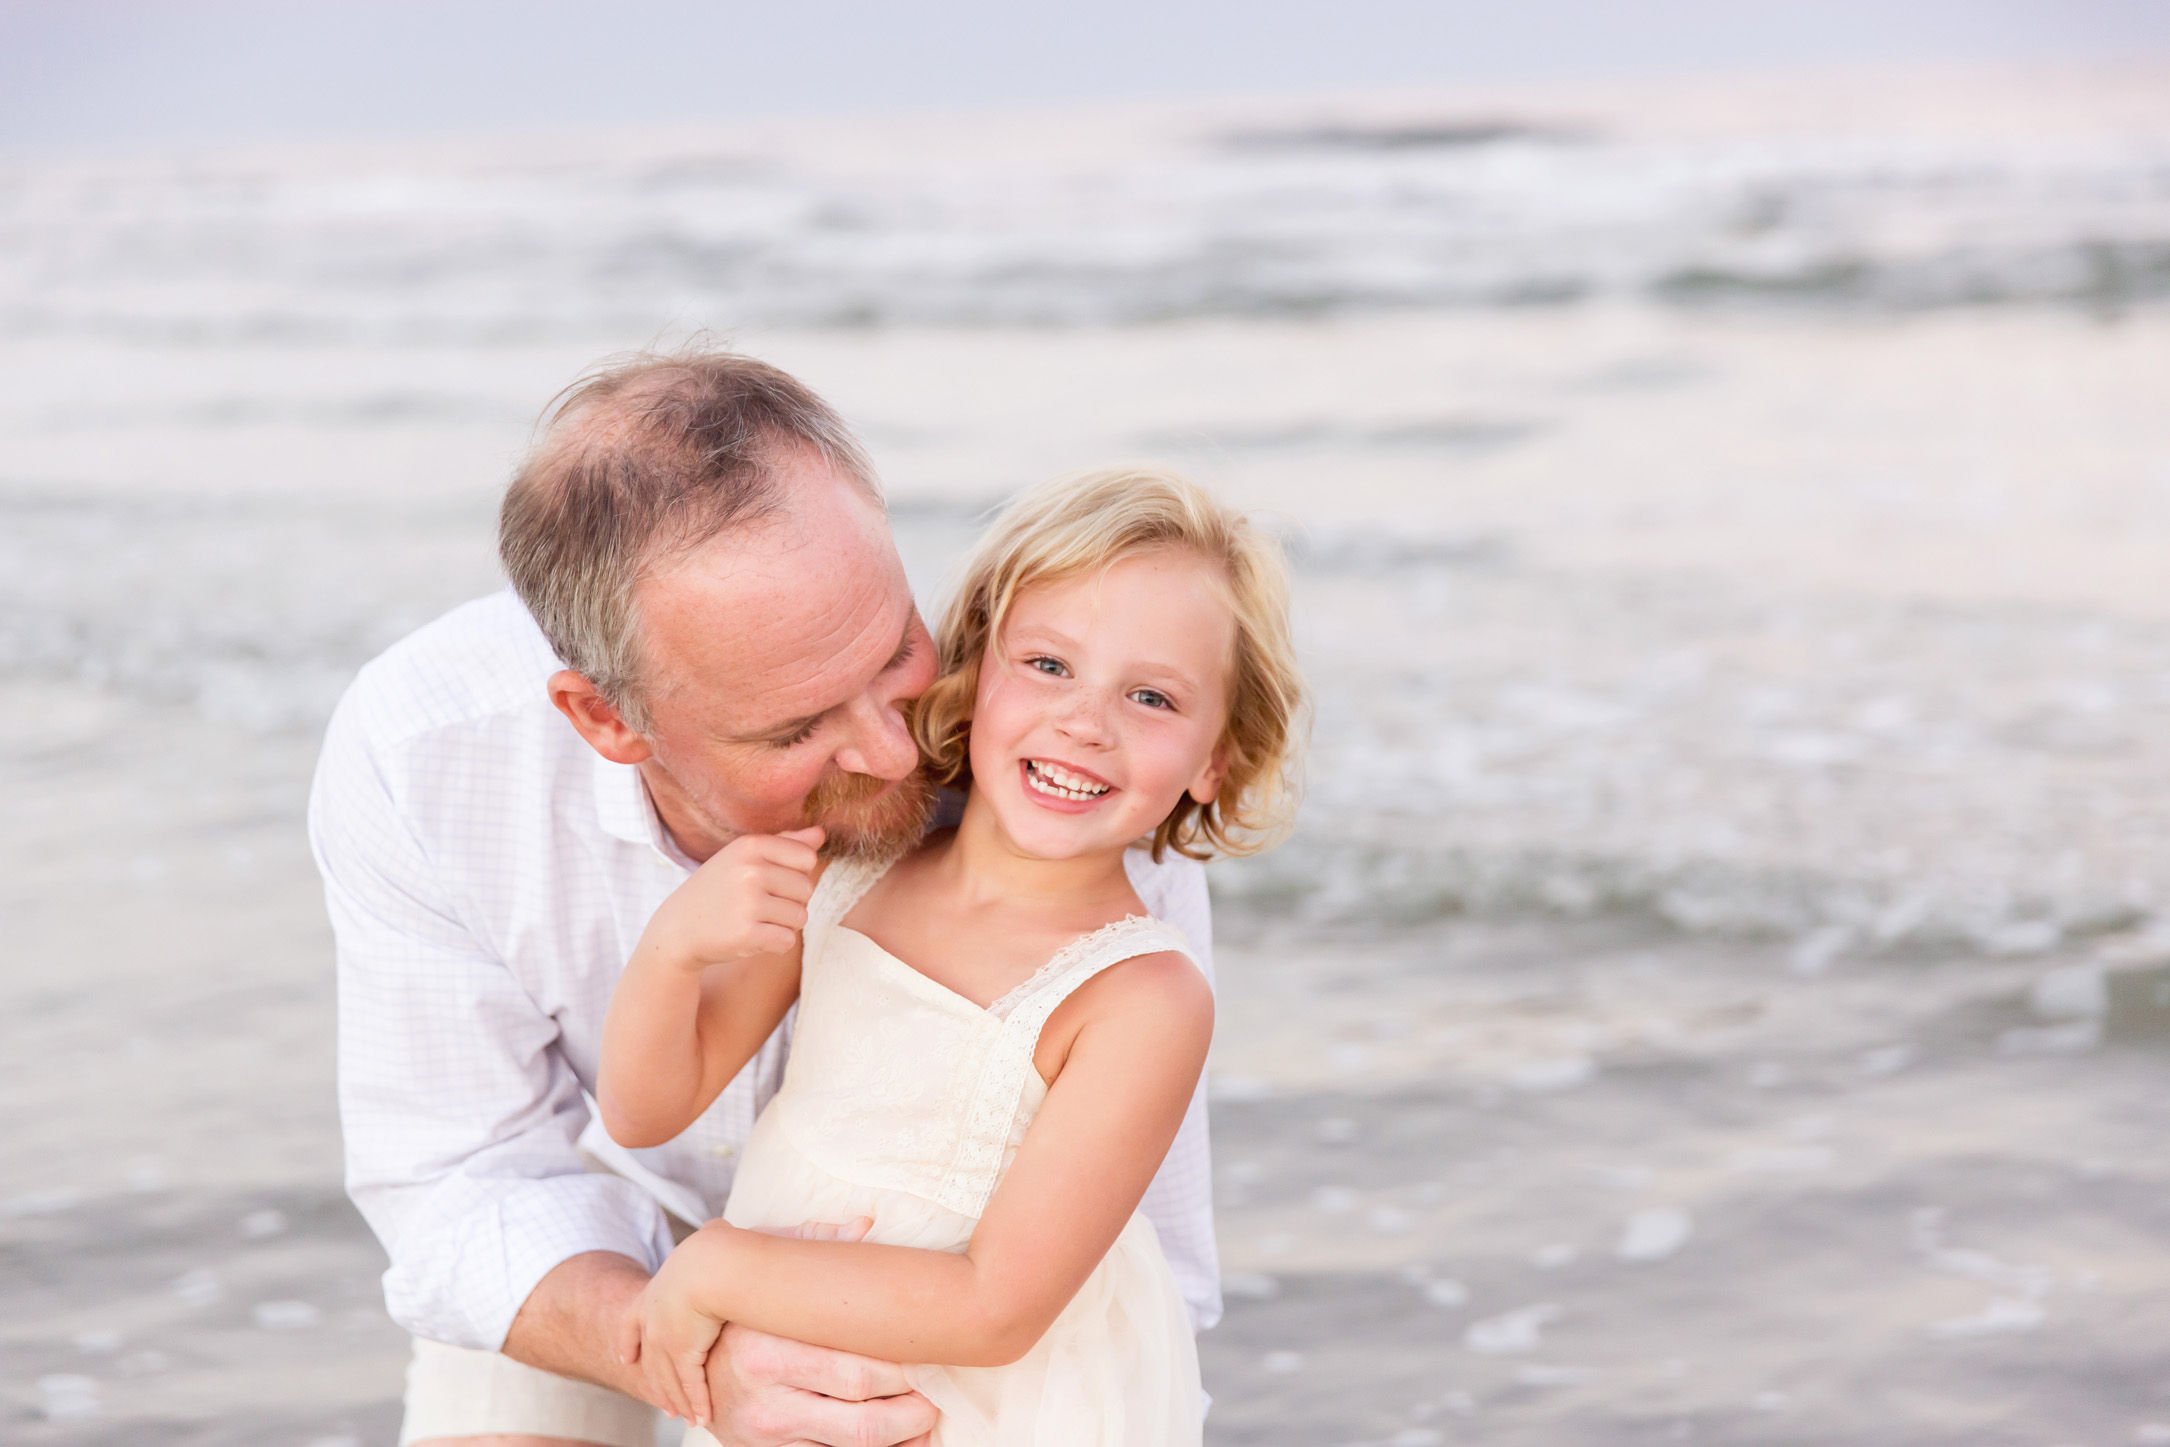 dad kissing daughter on the beach